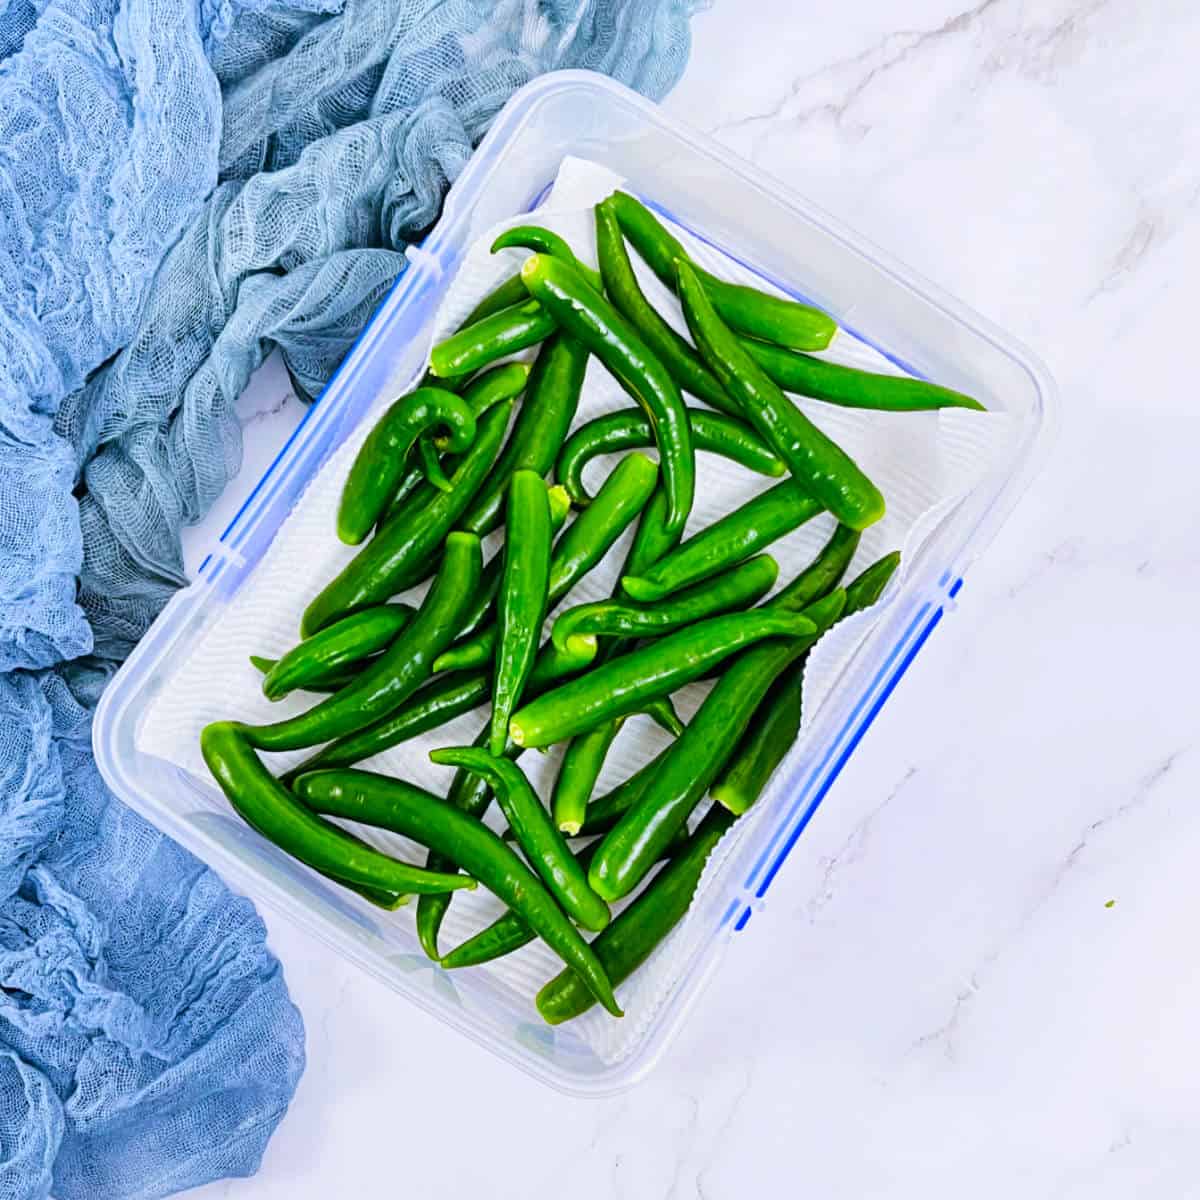 How to store green chili peppers in the refrigerator.